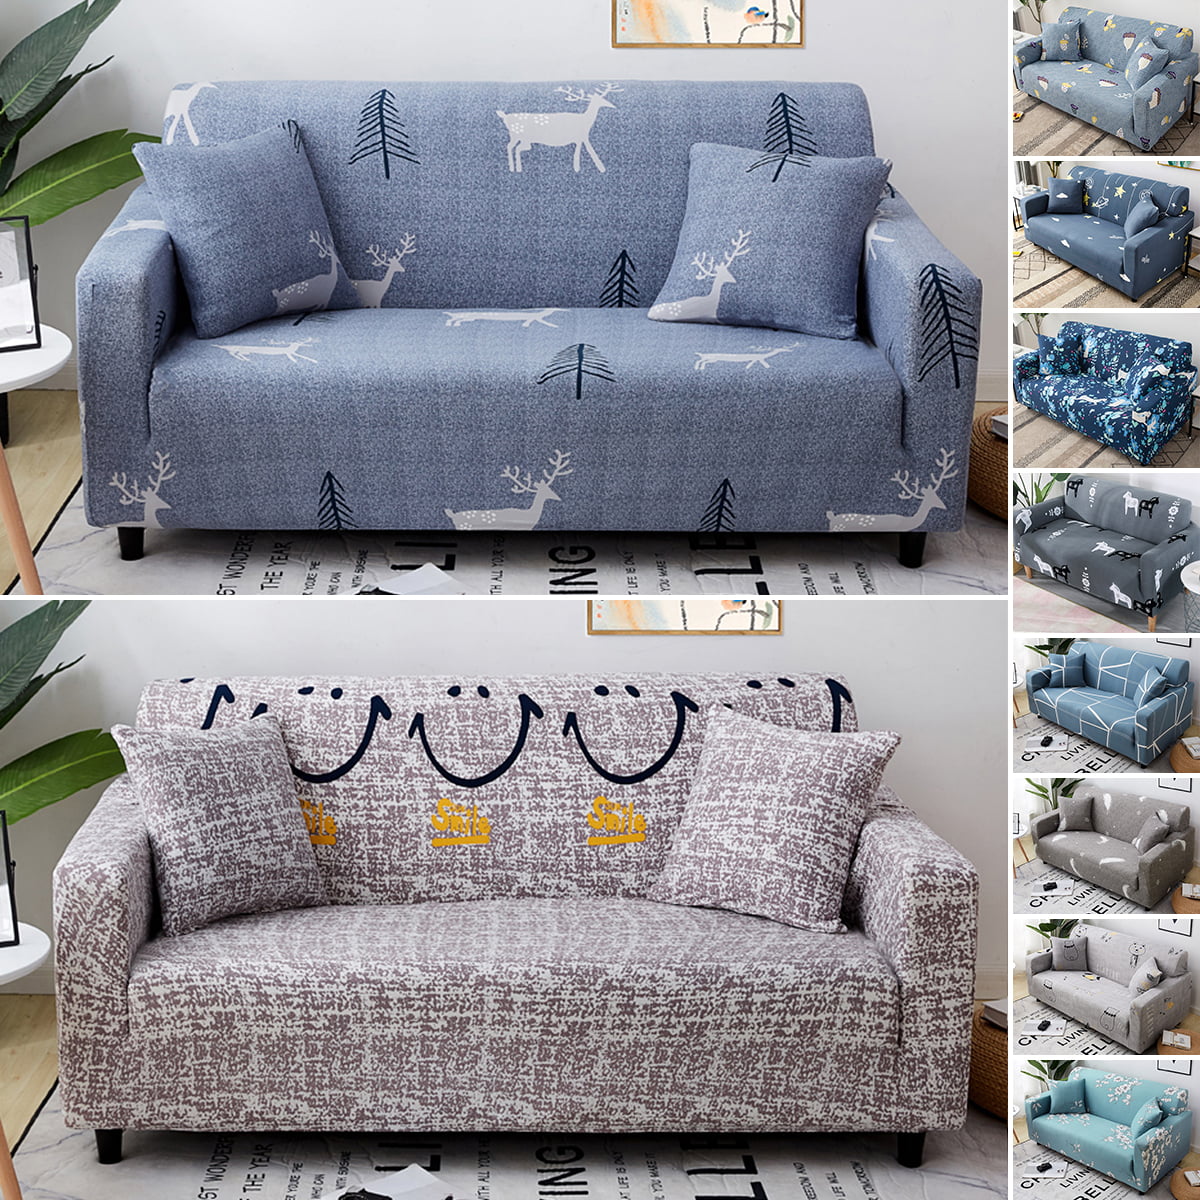 Details about   1/2/3/4 Seat Sofa Cover Couch Loveseat Slipcover Pet Dog Mat Furniture Protector 